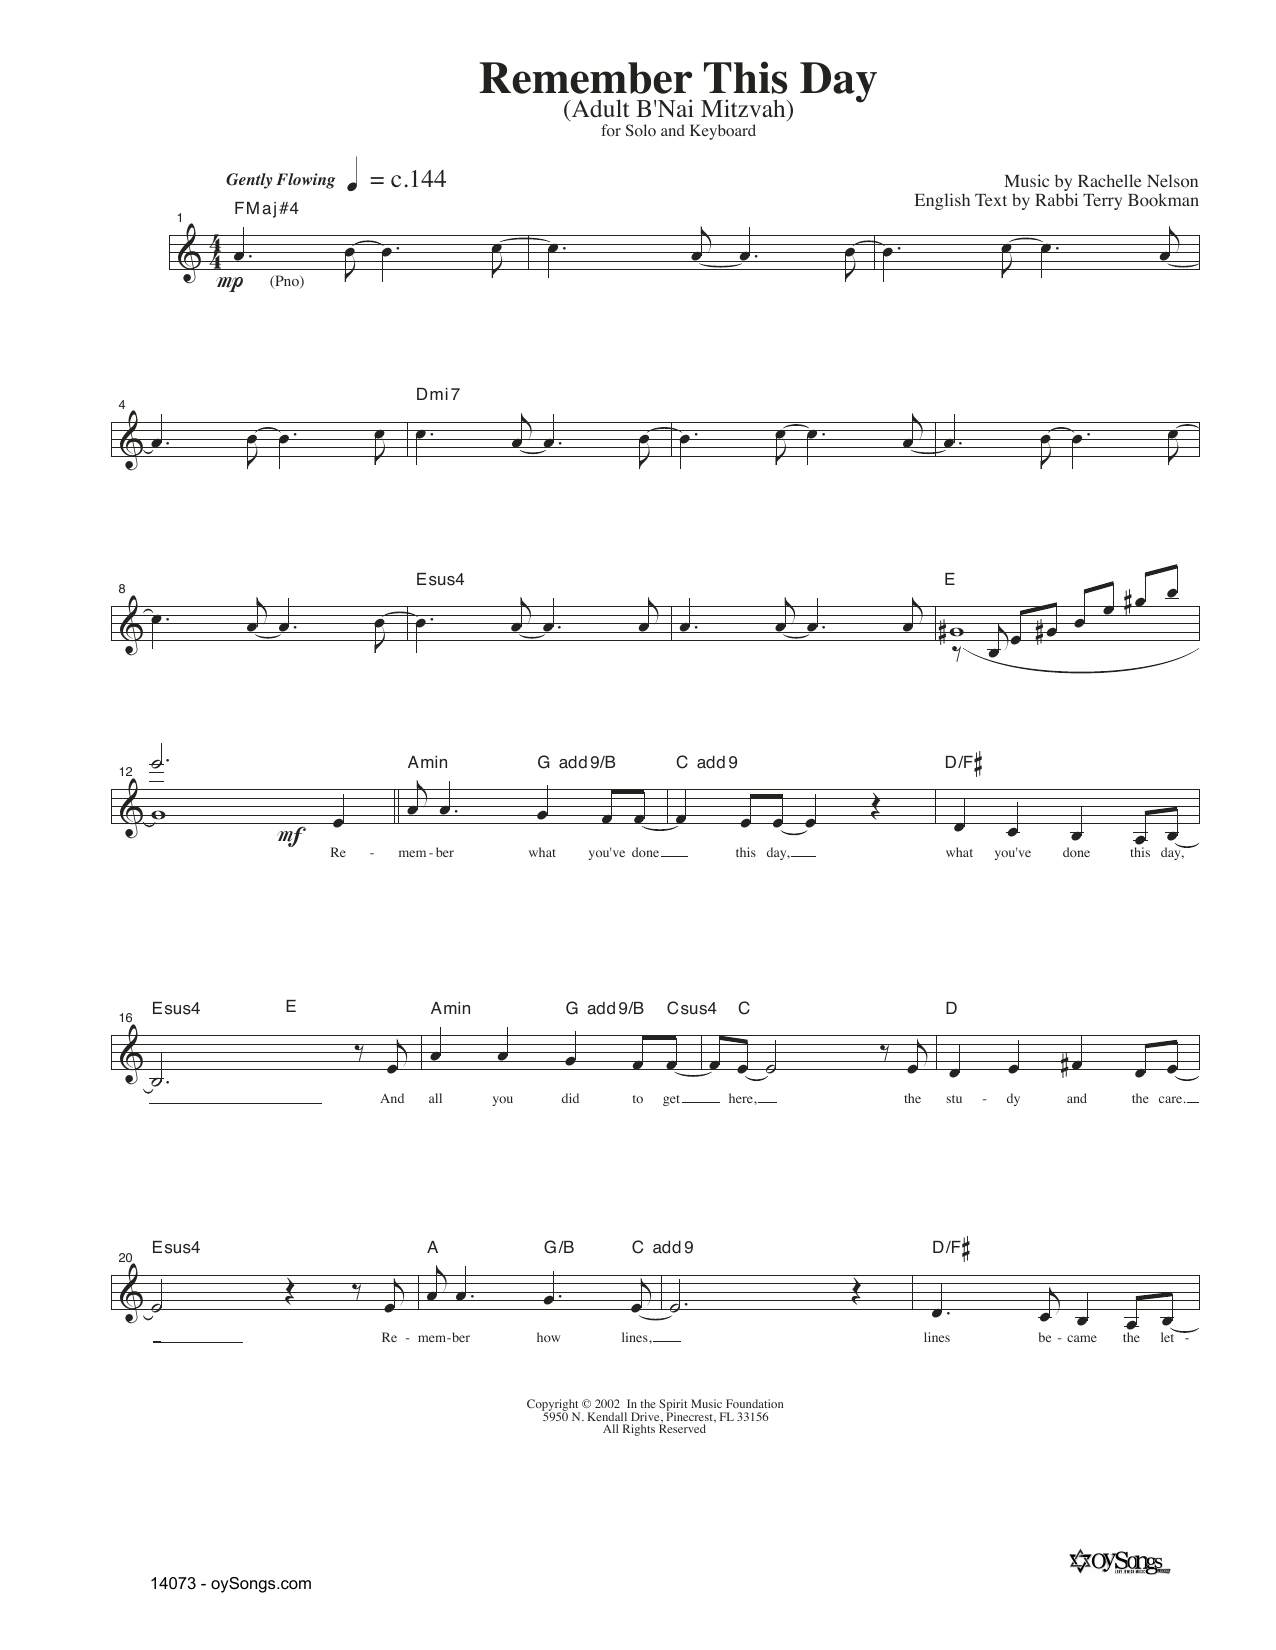 Download Rachelle Nelson Remember This Day Sheet Music